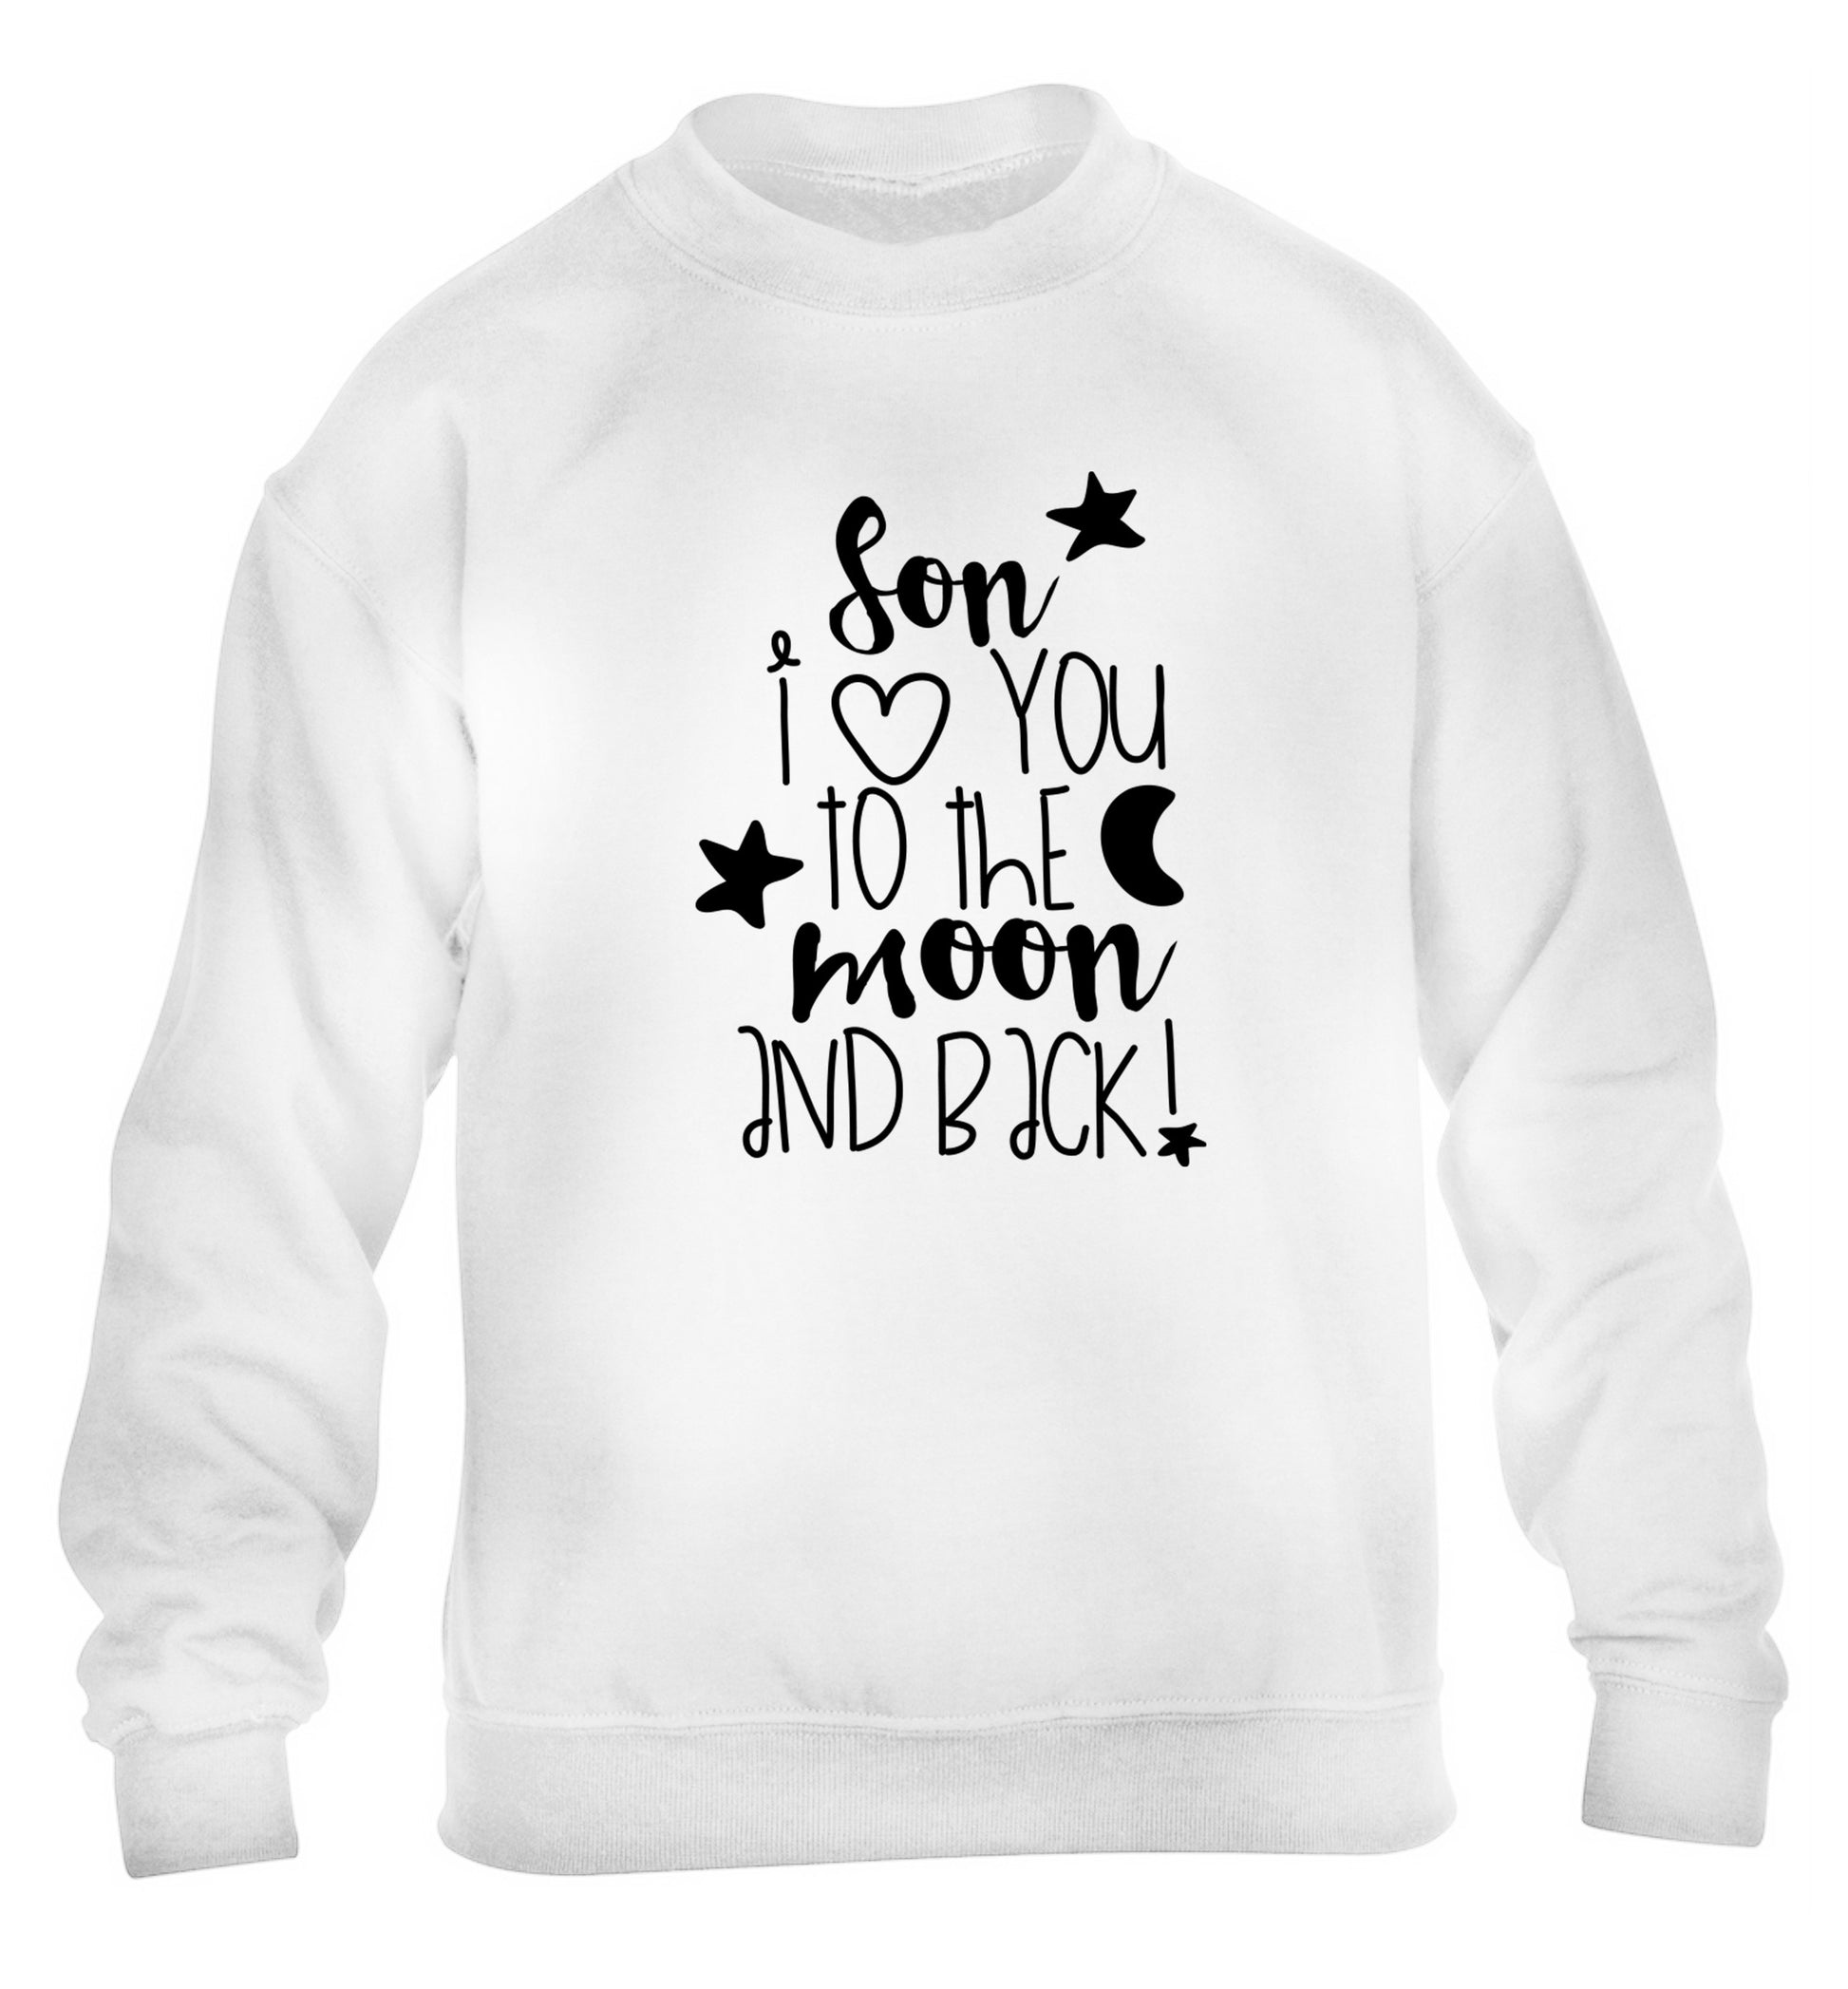 Son I love you to the moon and back children's white  sweater 12-14 Years